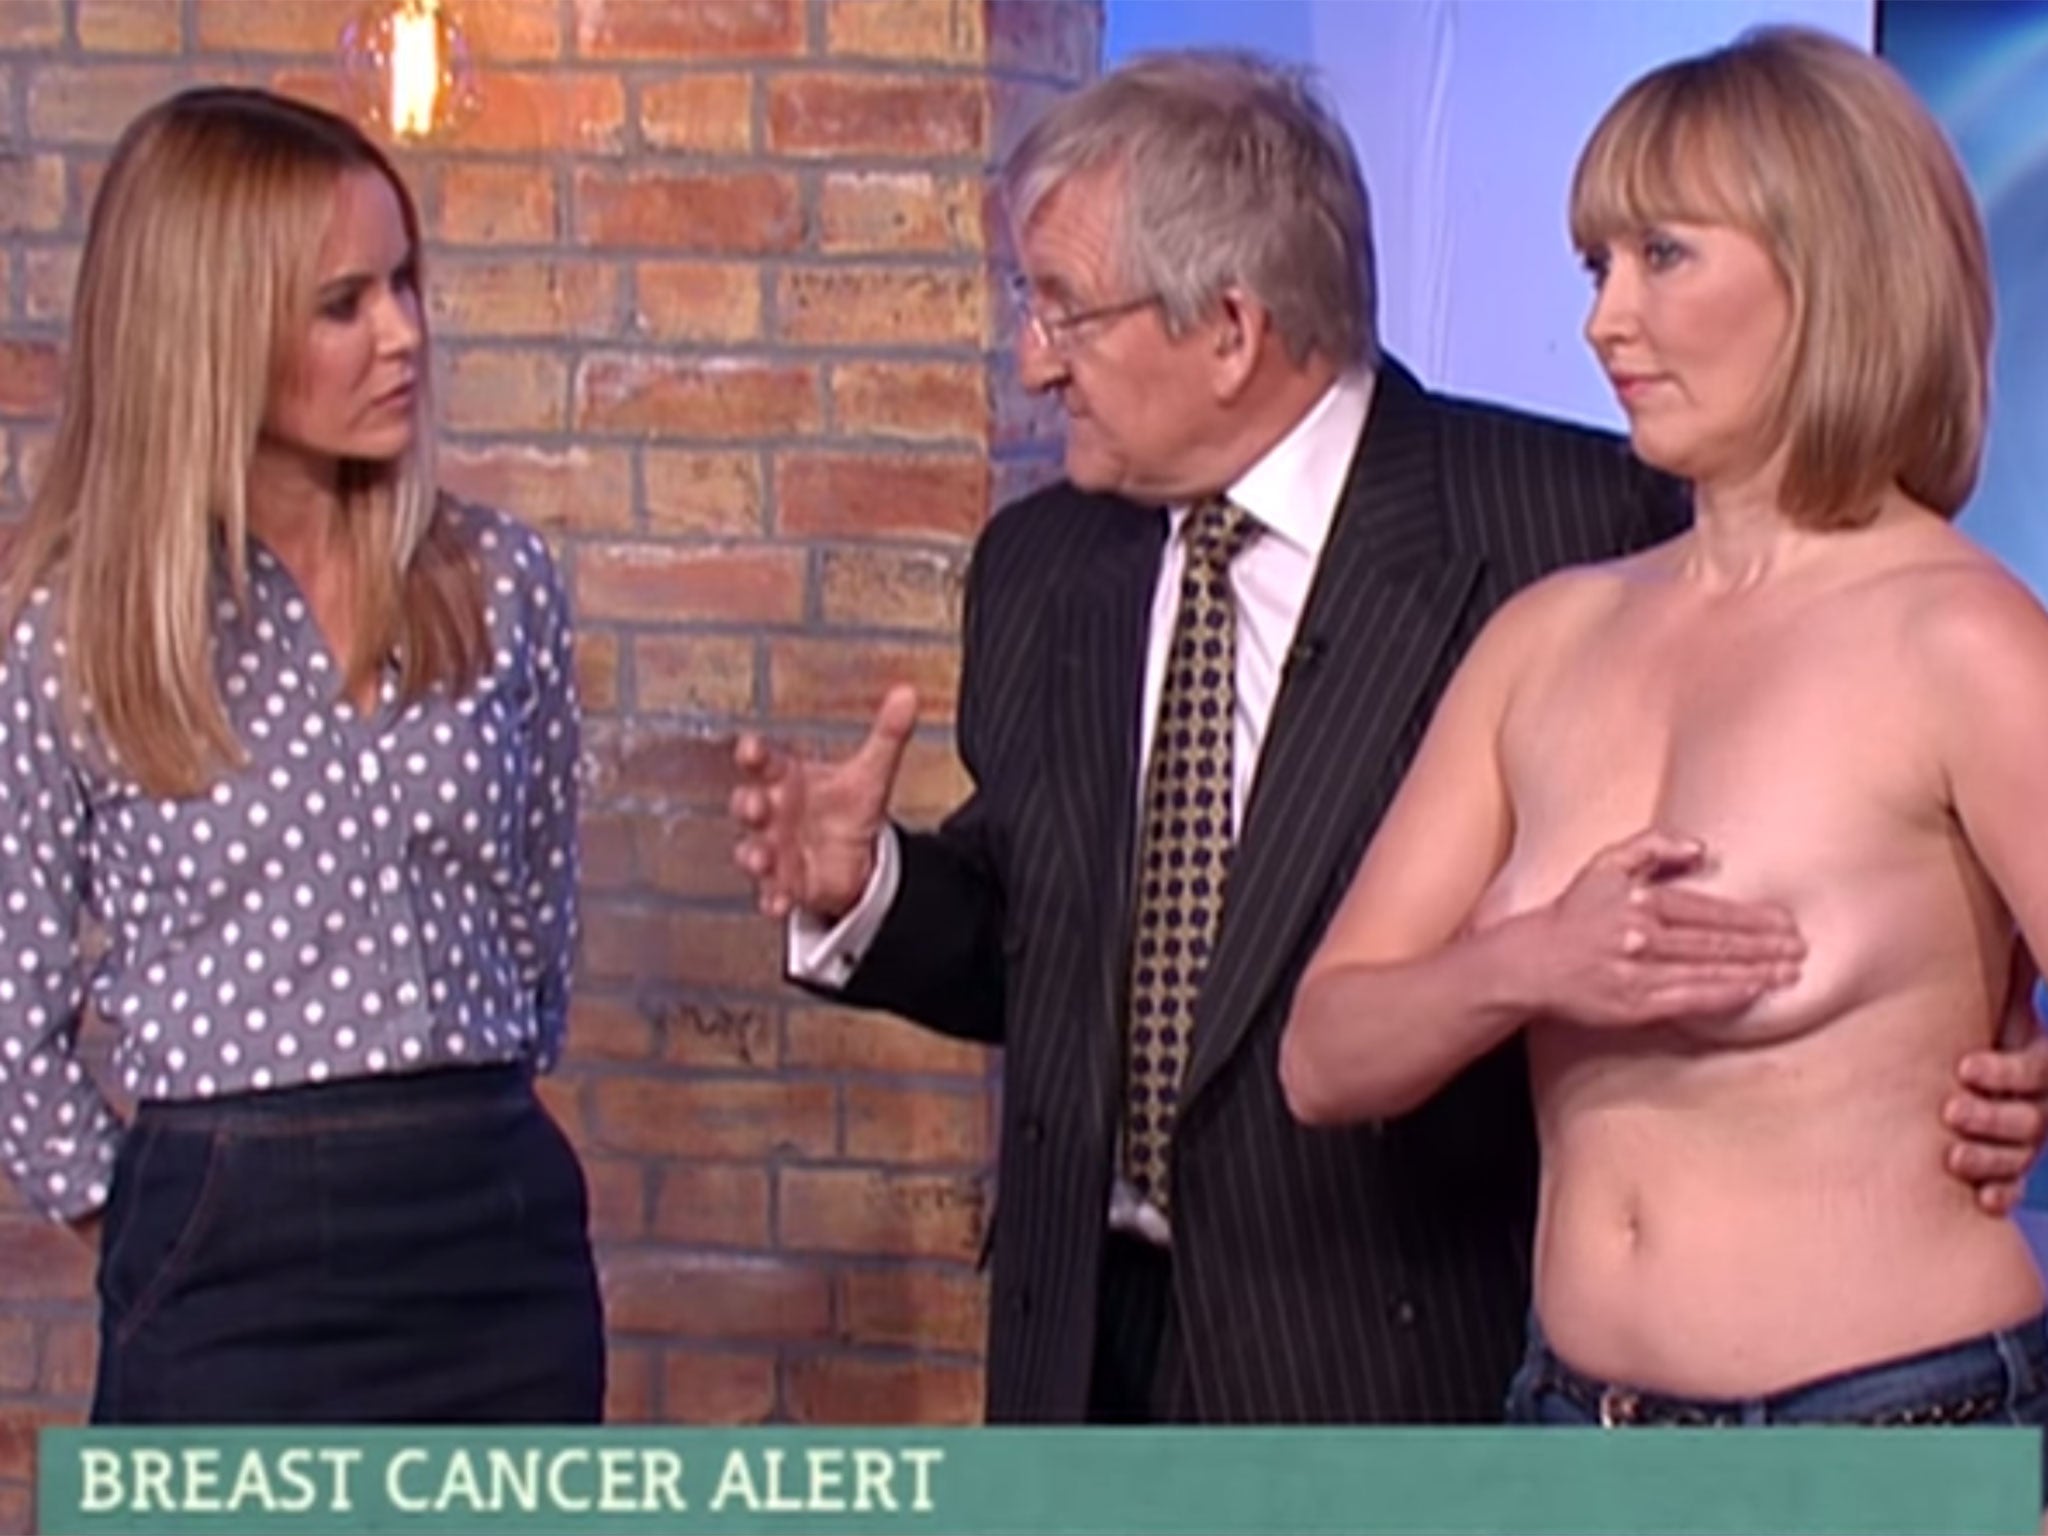 Fat Black Boobs Accidental - BBC News at 10 accidentally live broadcast X-rated scene ...